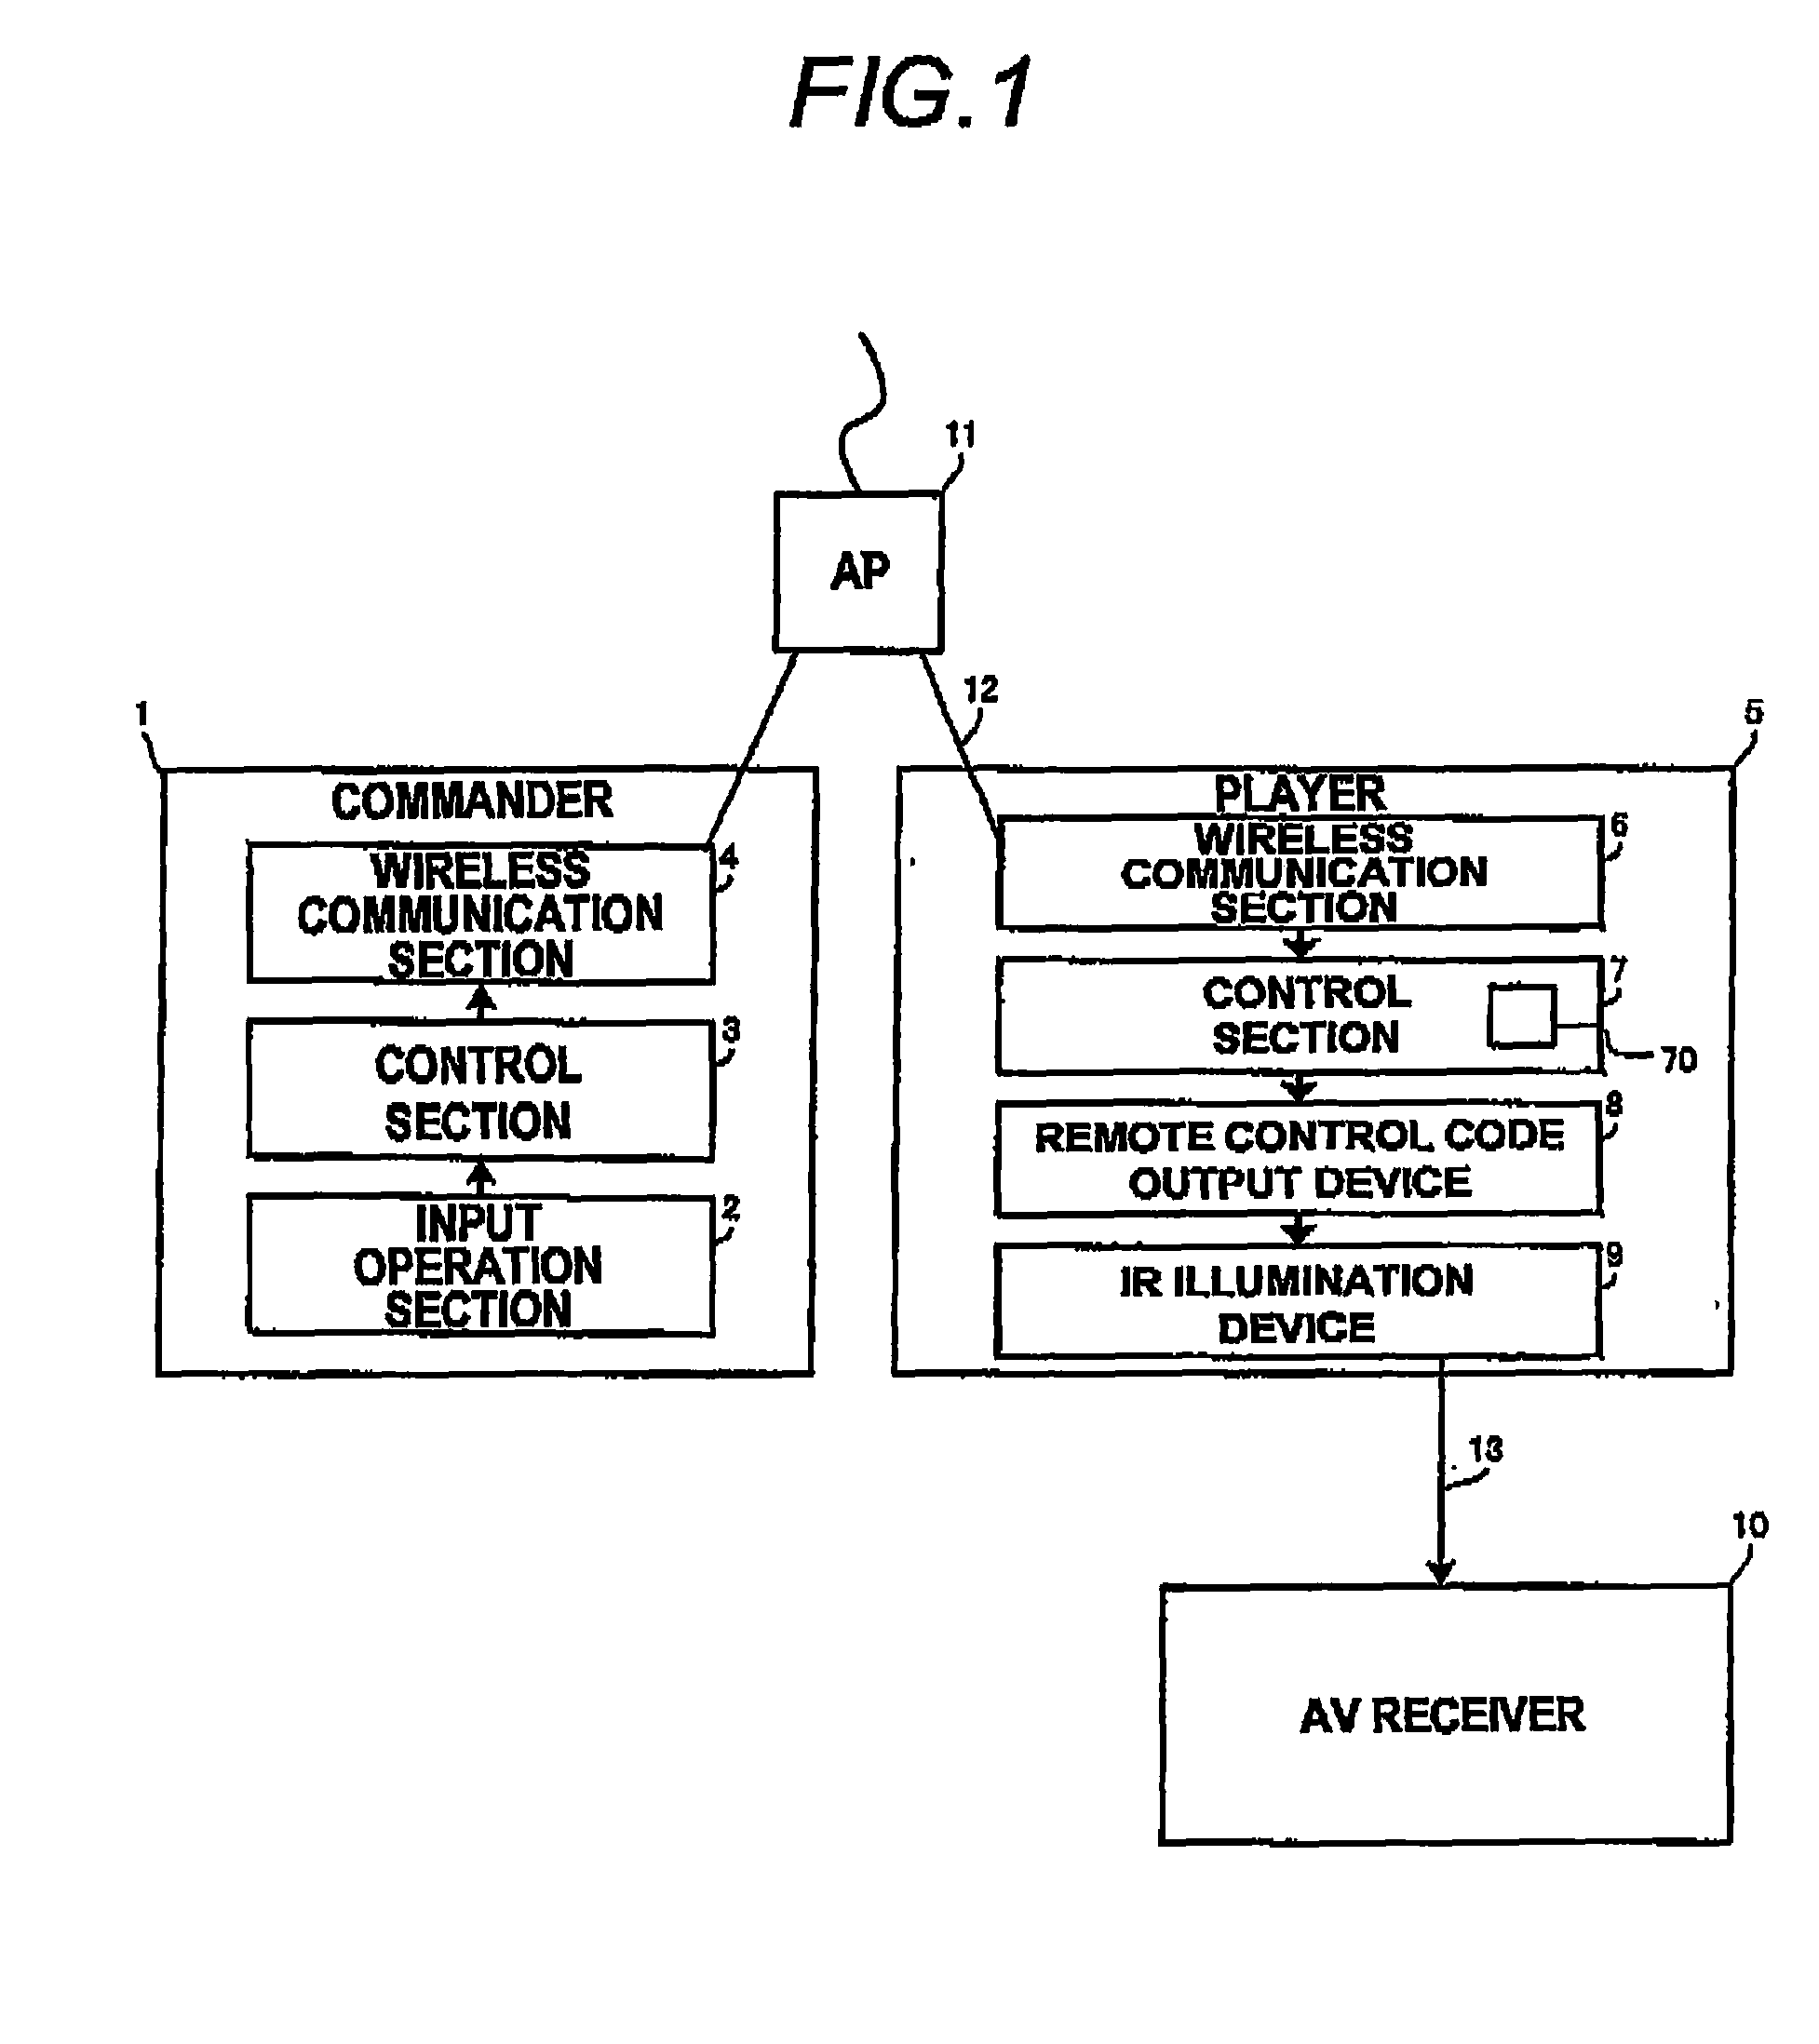 Remote Control System and Relay Unit